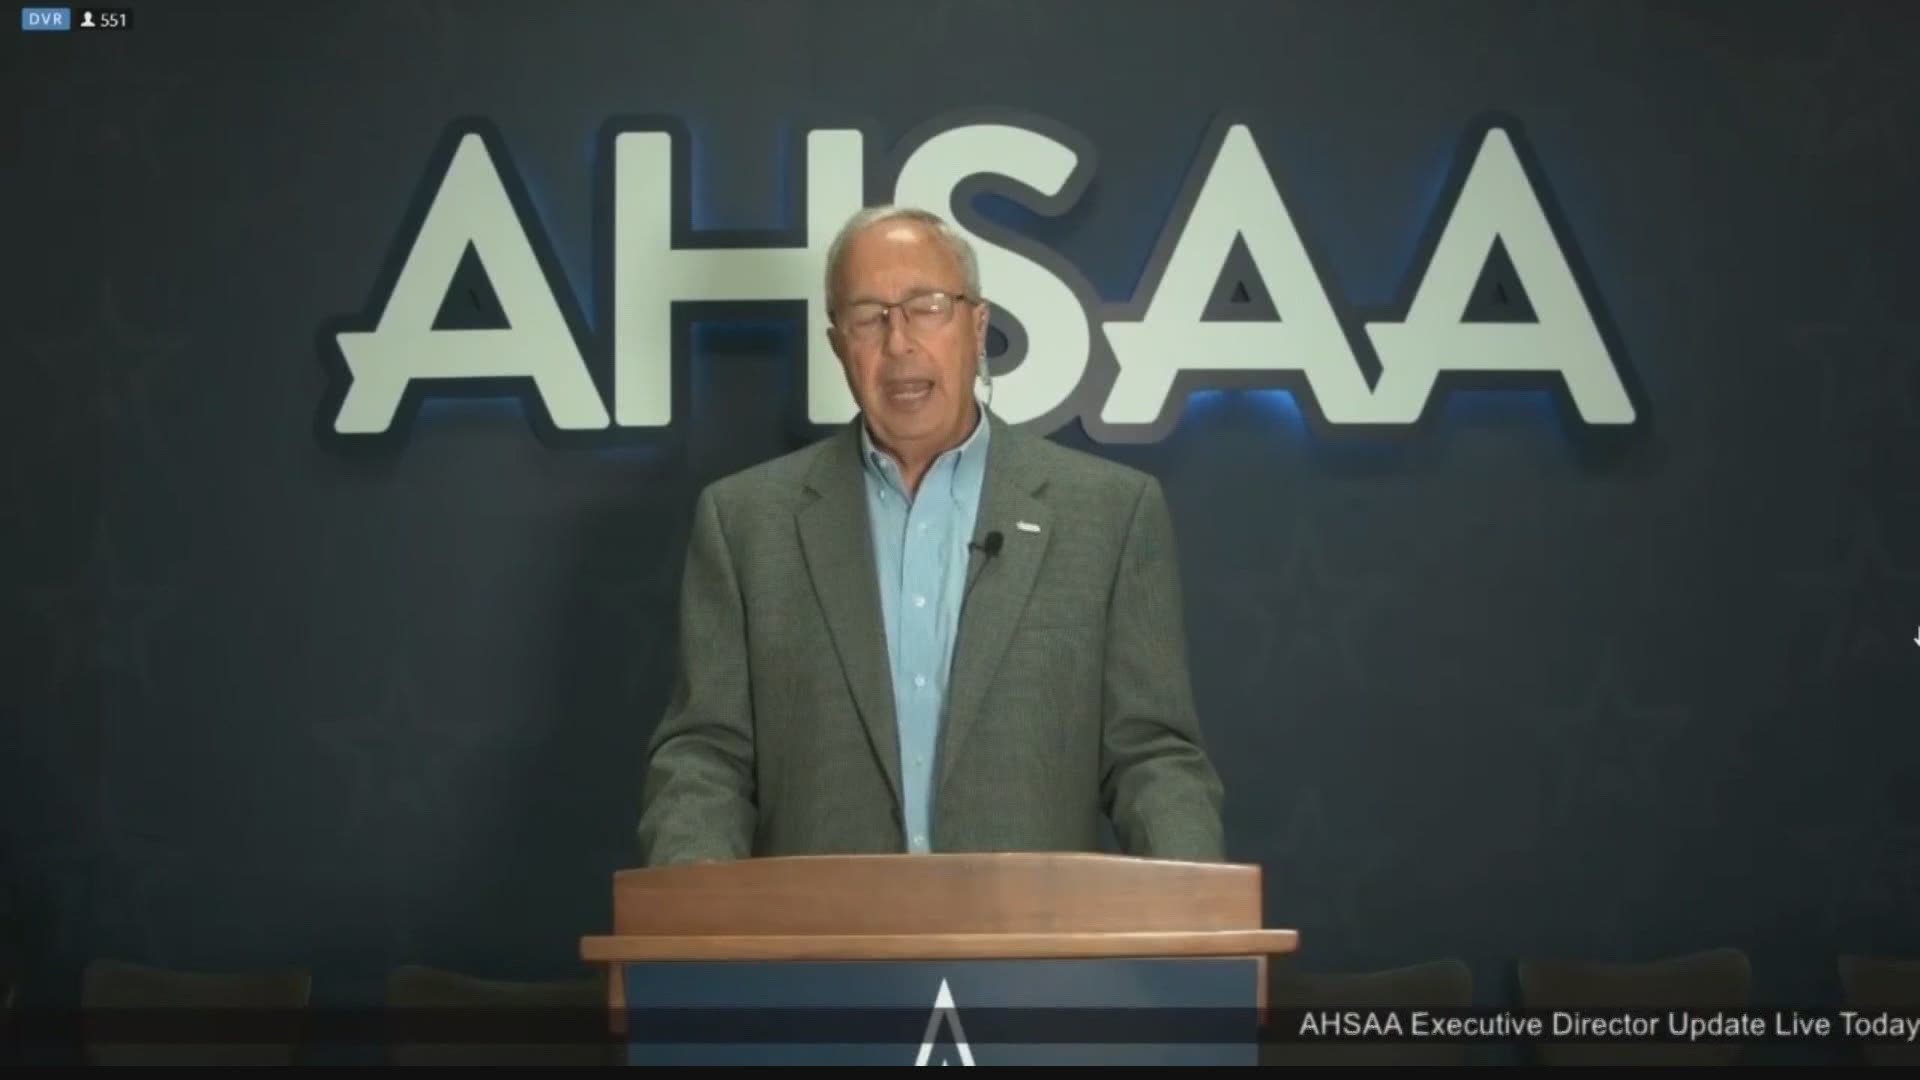 Steve Savarese, executive director of the AHSAA, will lead the National Federation of State High School Associations (NFHS)